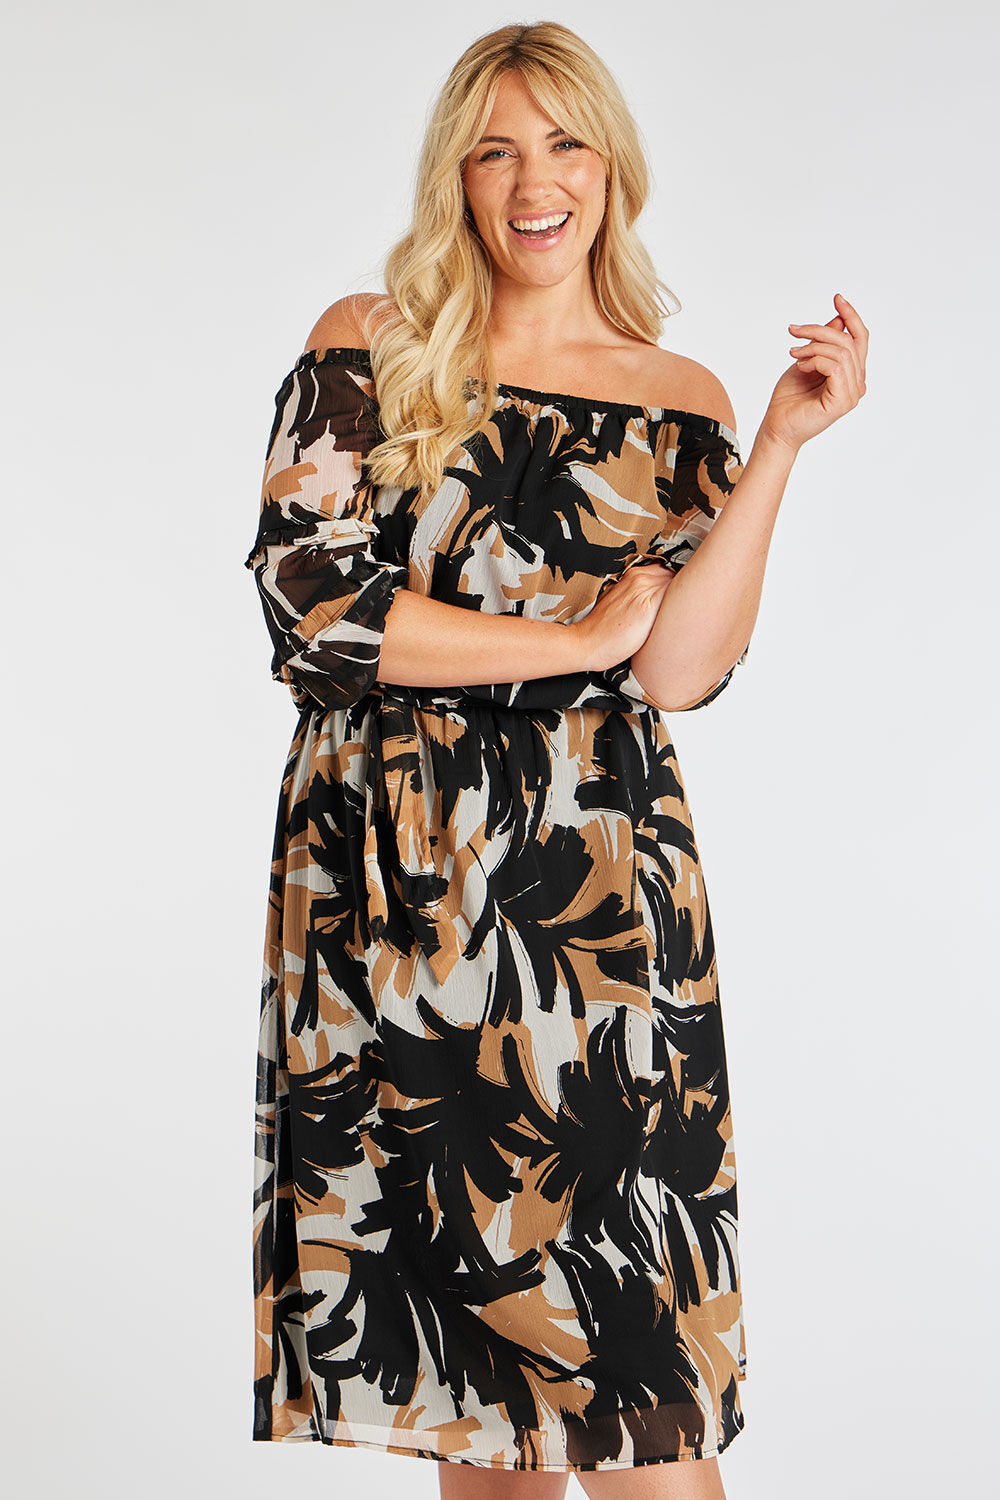 Bonmarche Black Abstract Print Bardot Dress With Ruffle Sleeves, Size: 14